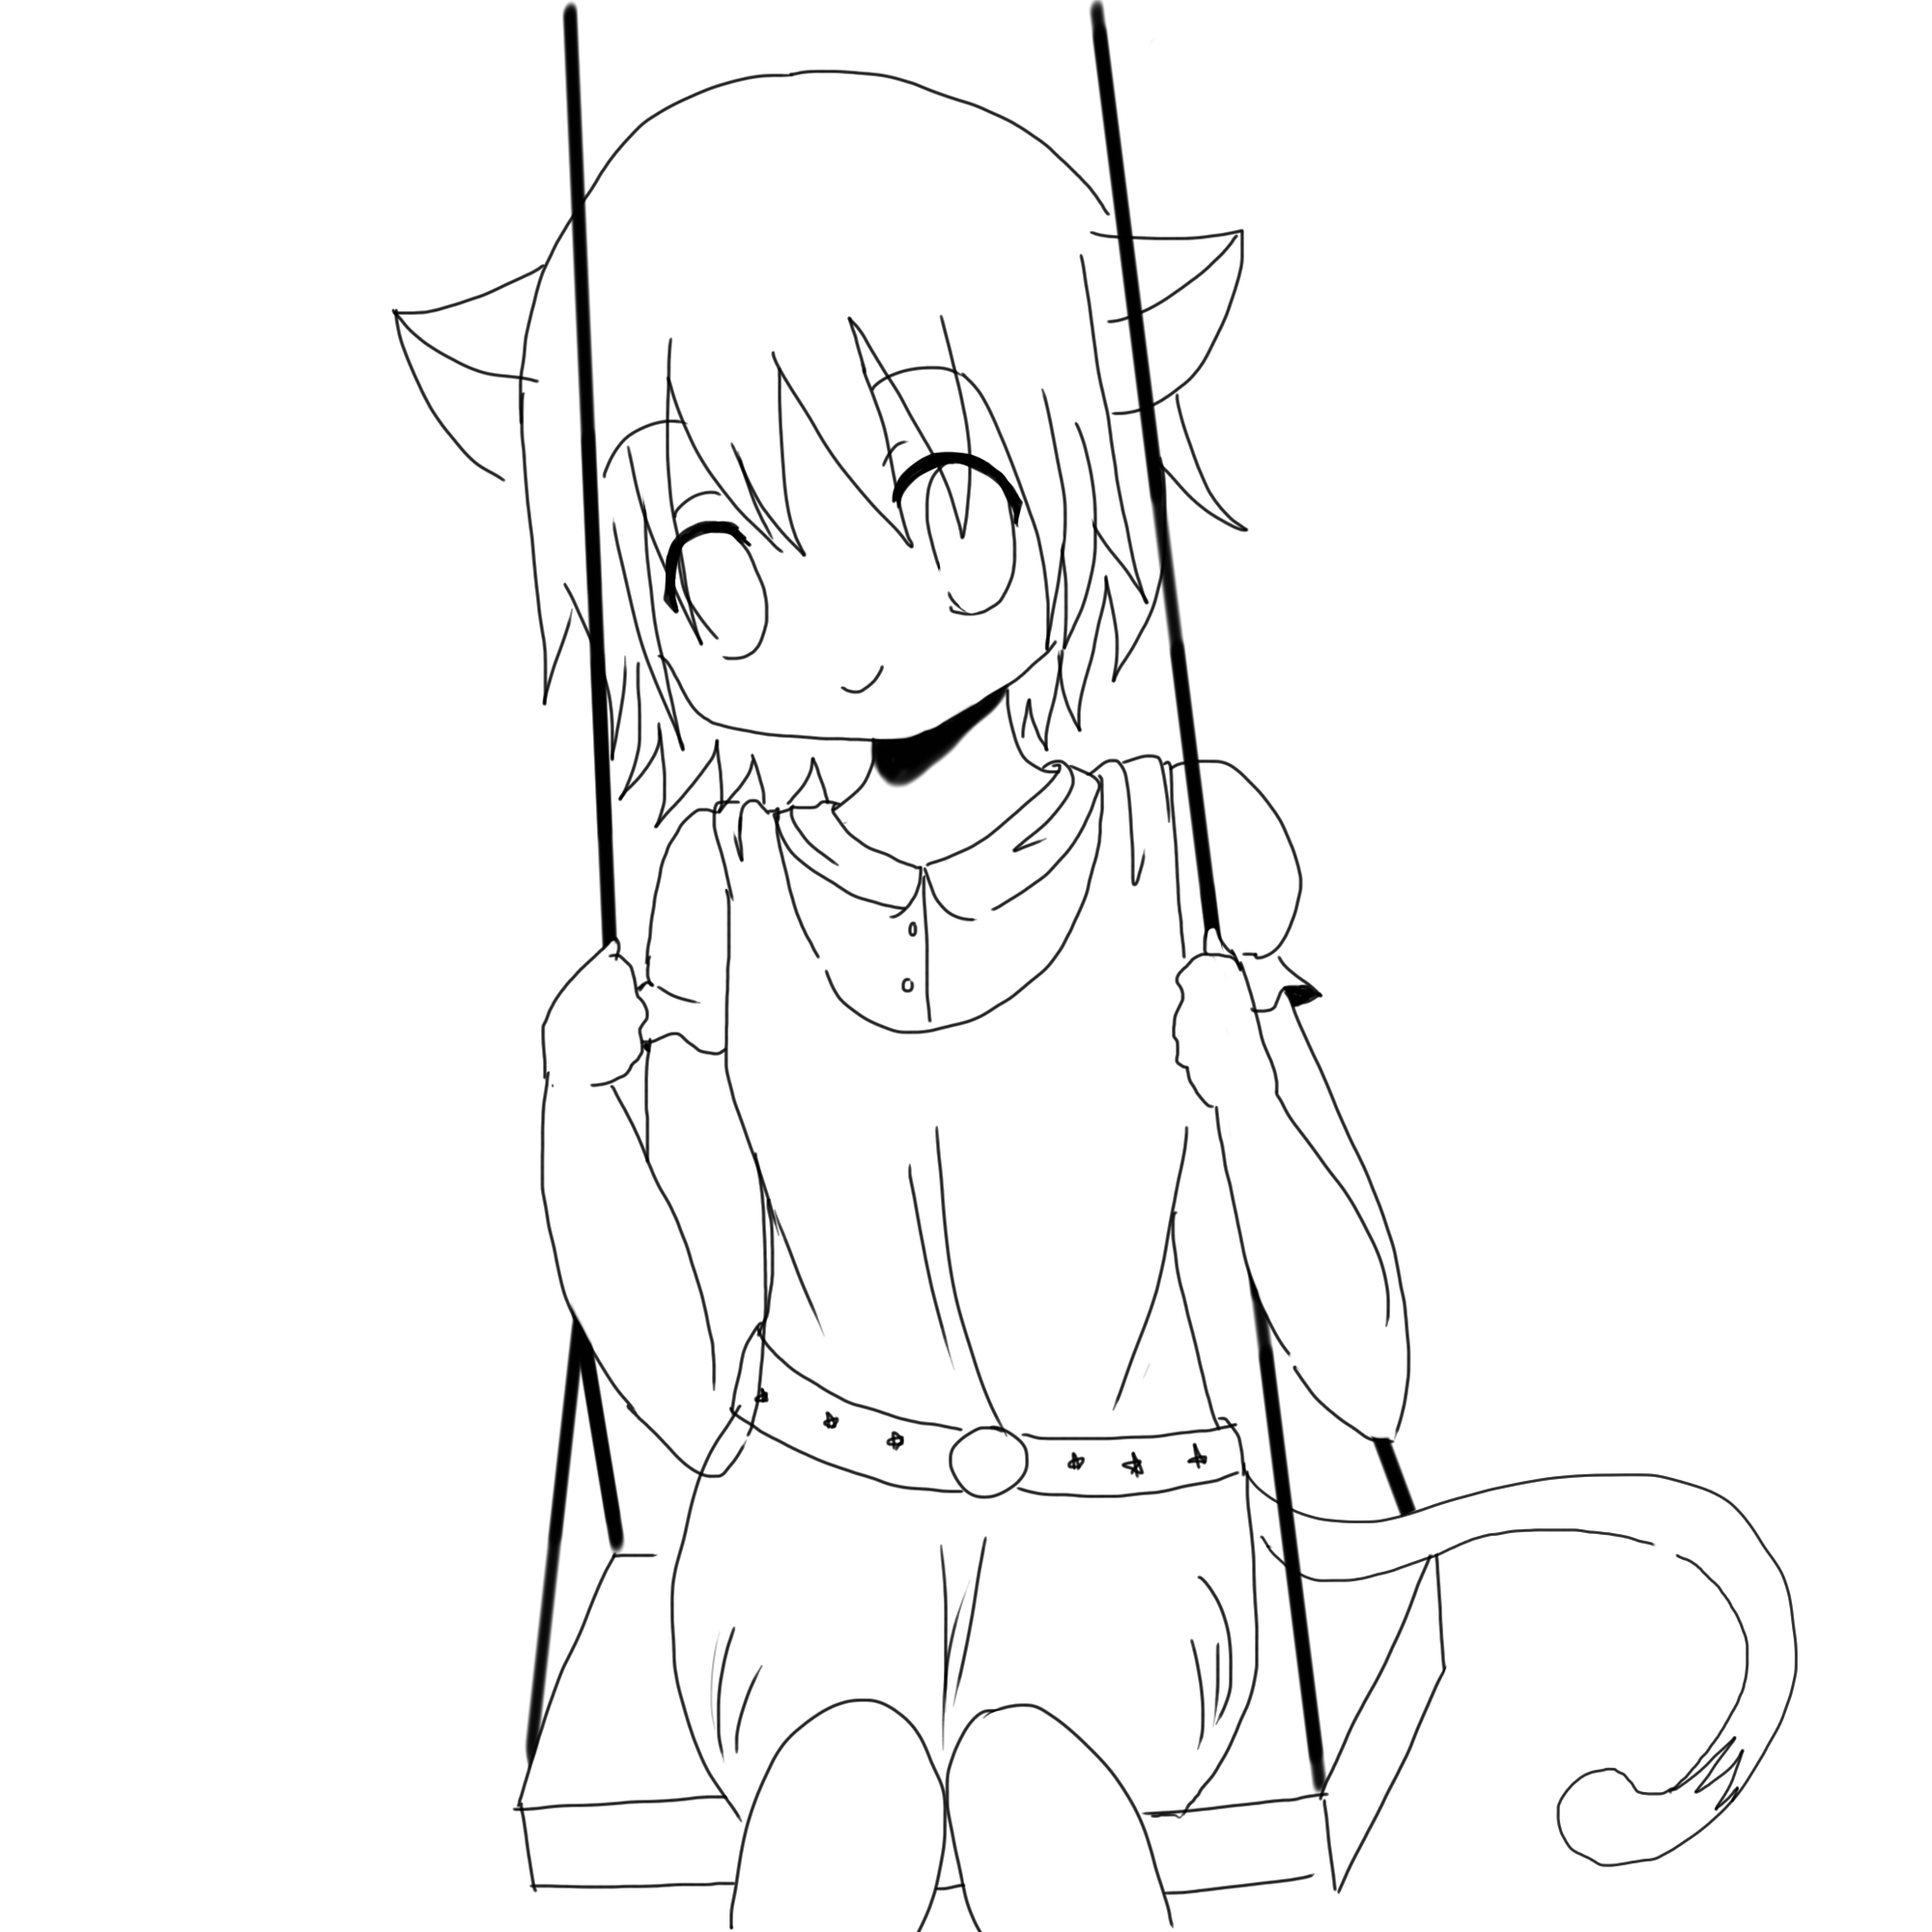 Anime Coloring Pages Cat - Coloring and Drawing